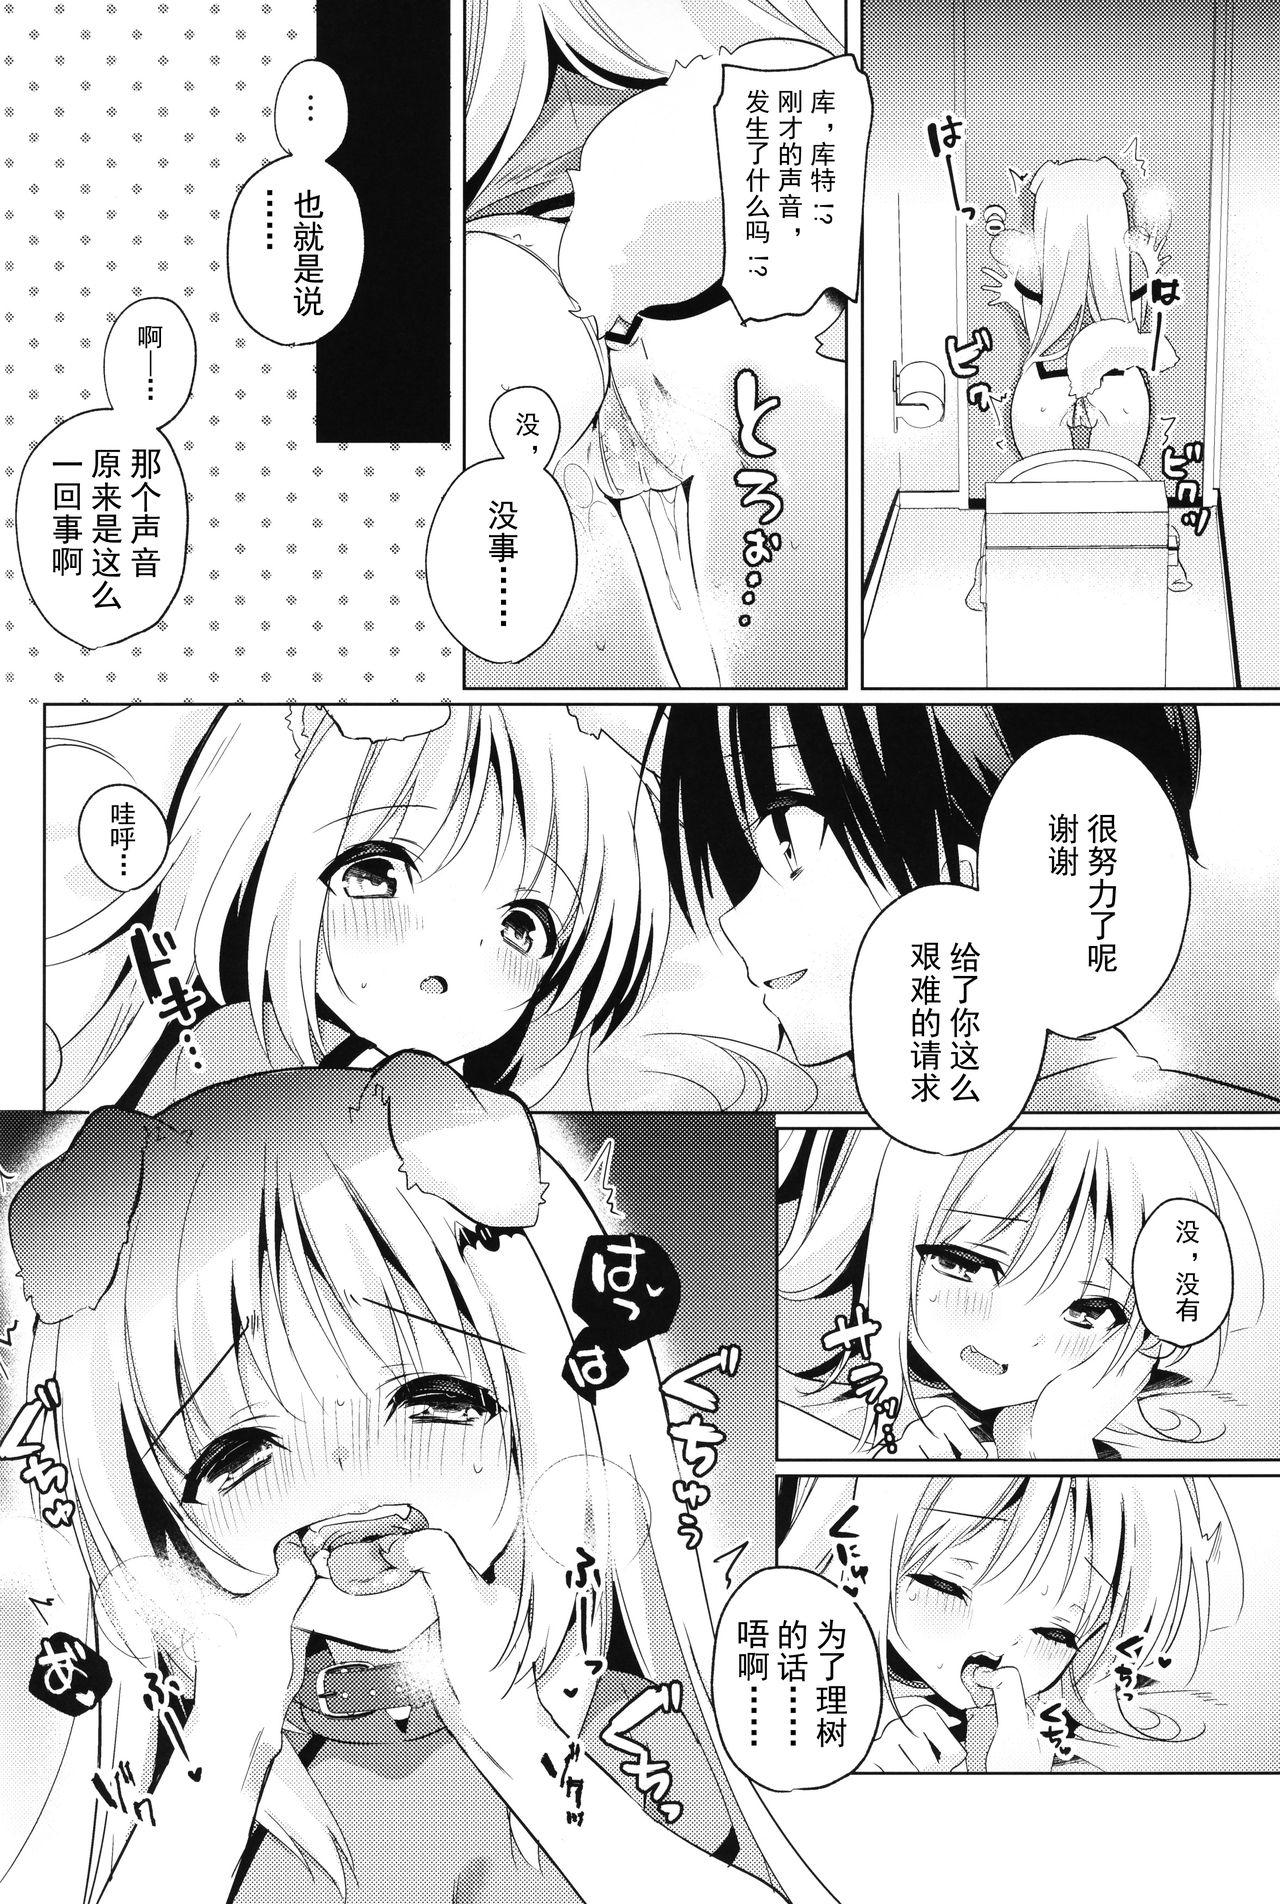 Indoor Kud After4 - Little busters Jocks - Page 10